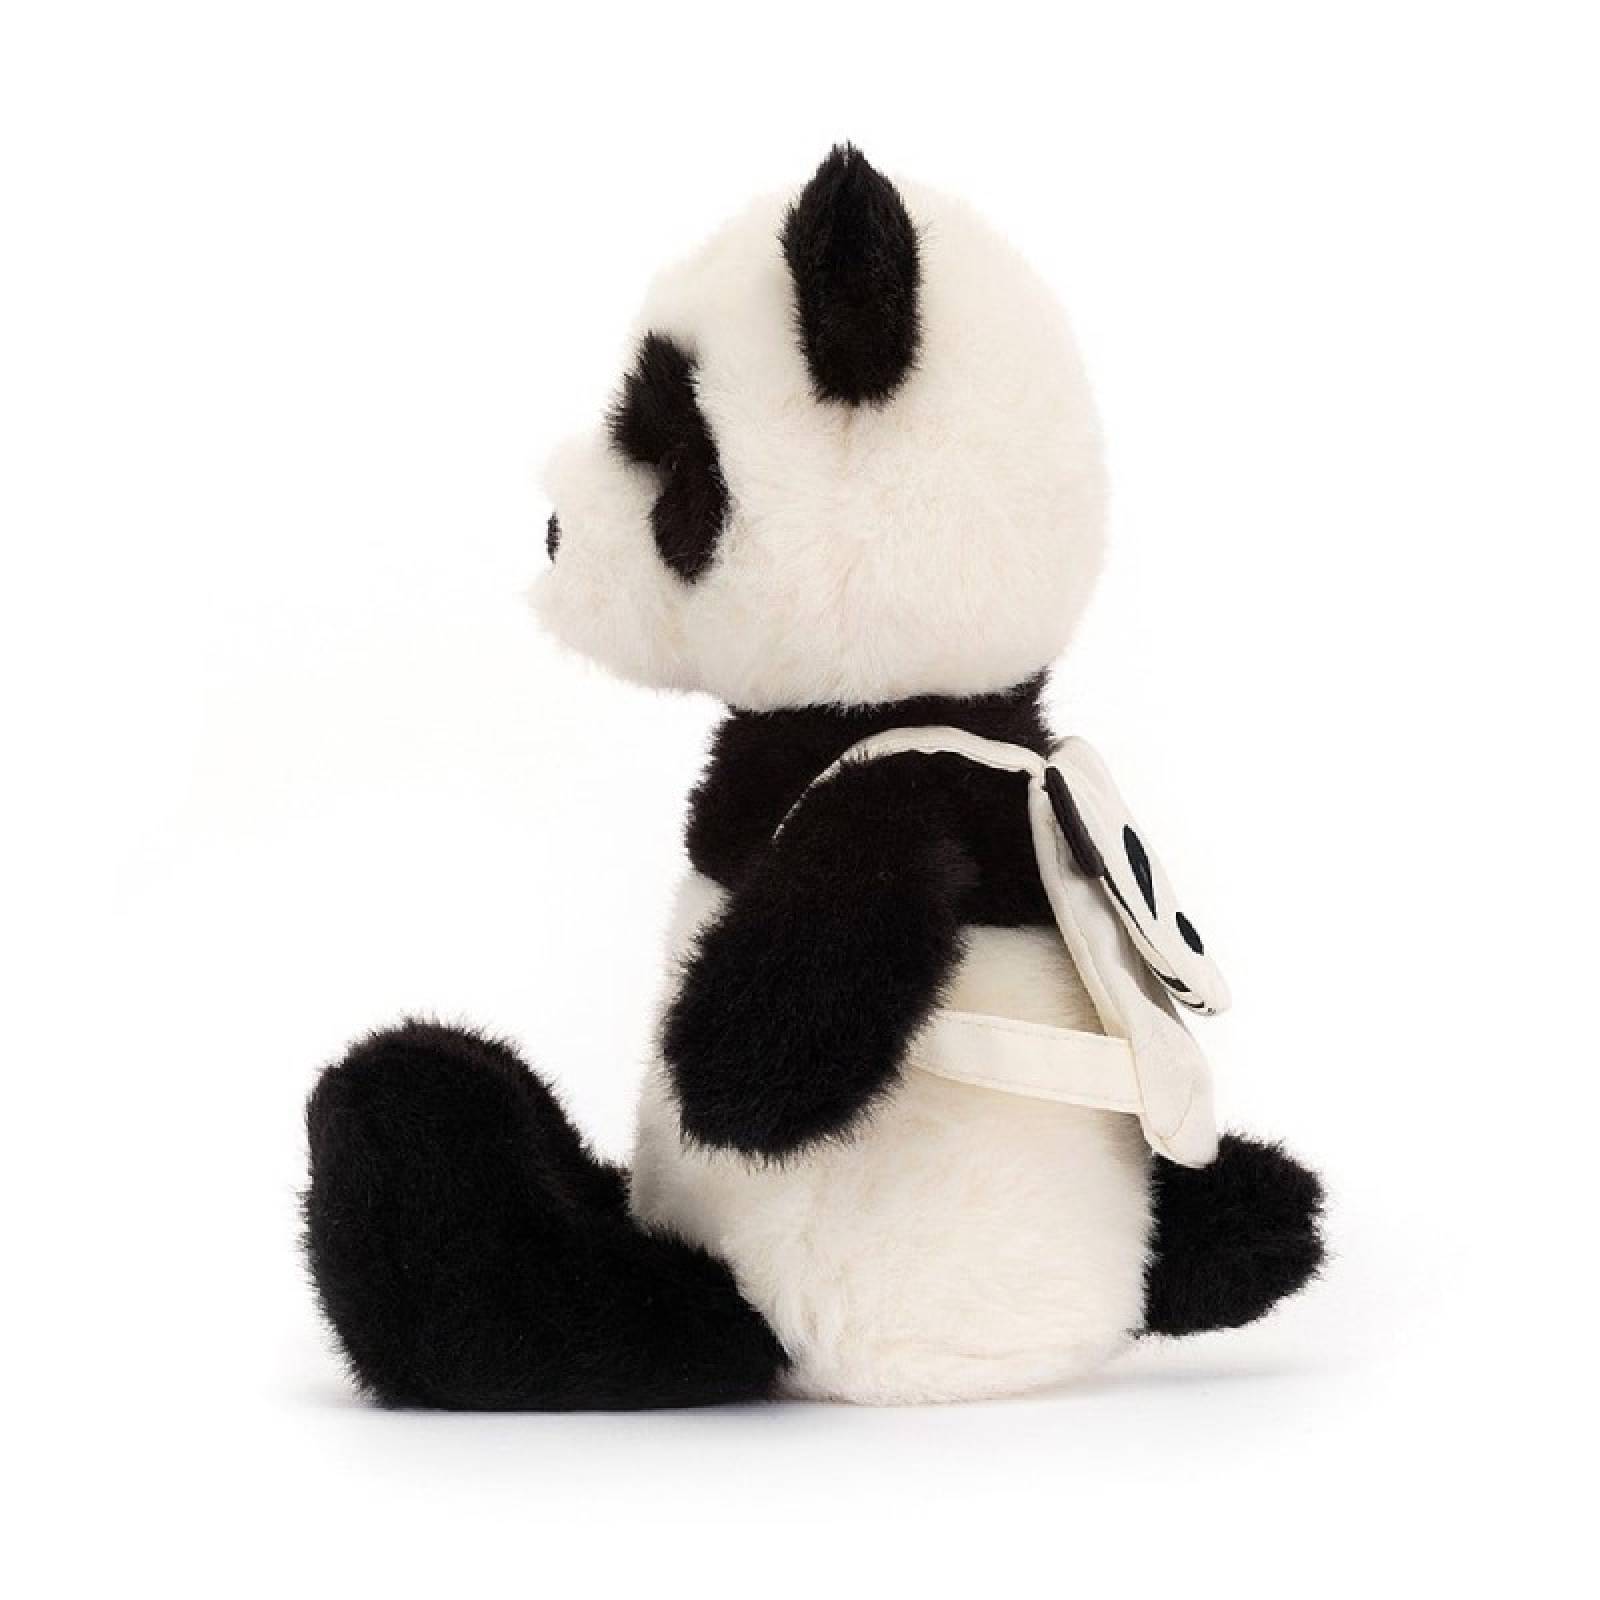 Backpack Panda Soft Toy By Jellycat 0+ thumbnails